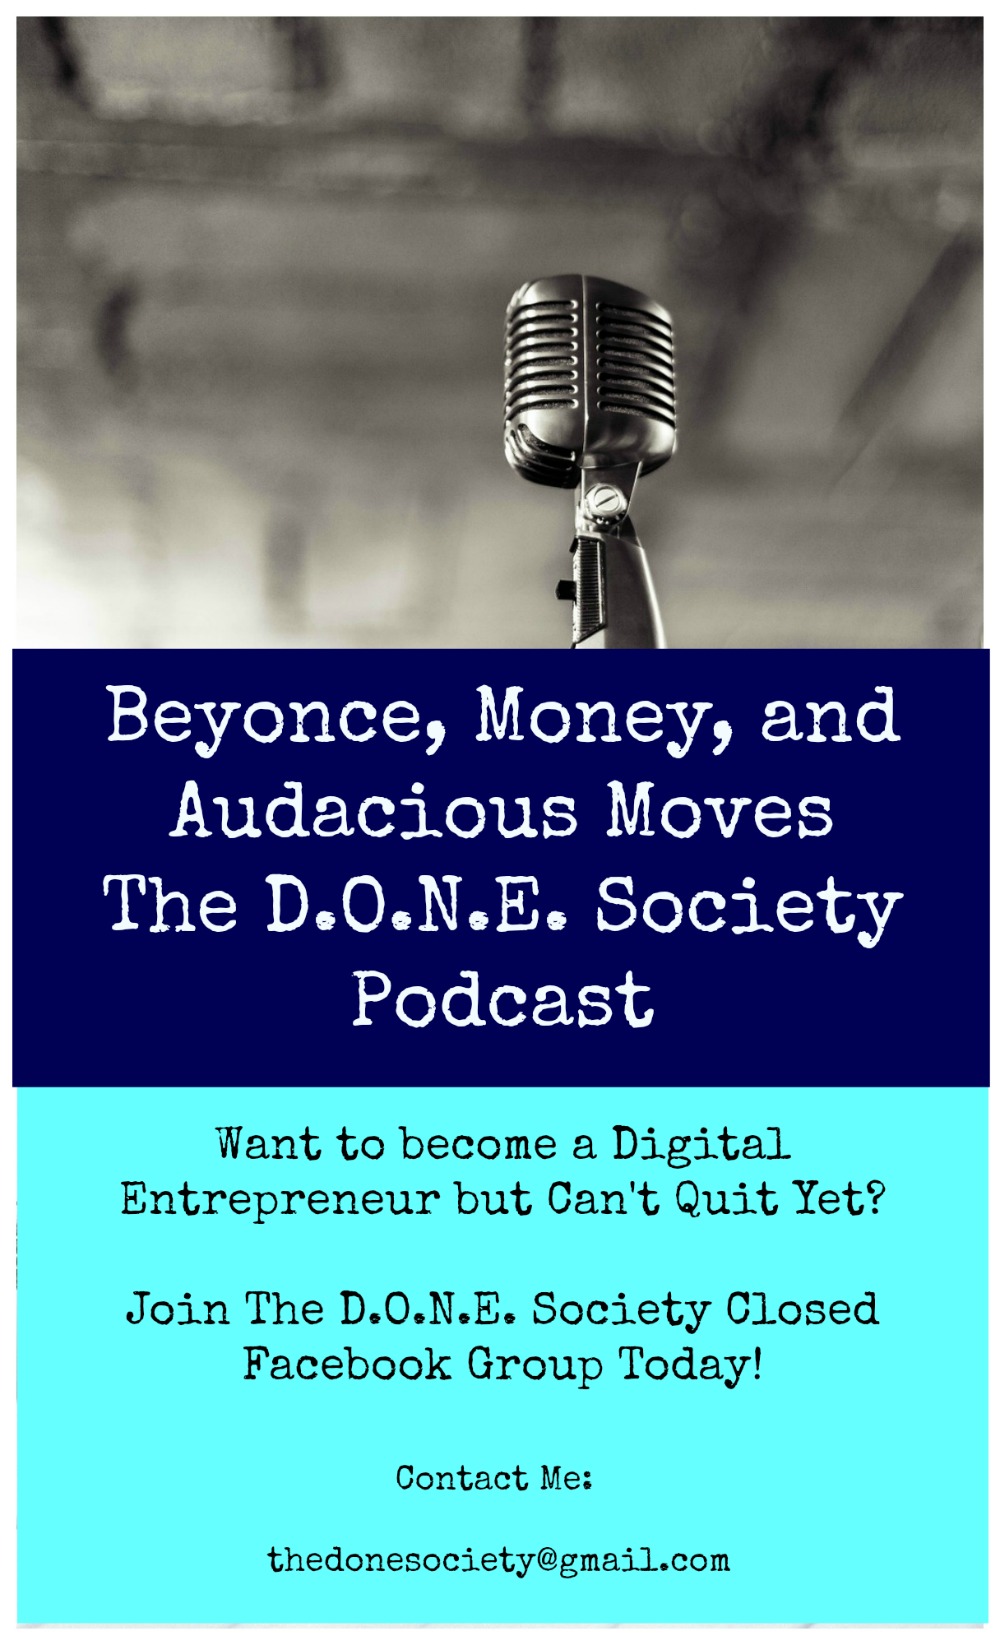 Beyonce, Money, and Audacious Moves The D.O.N.E. Society Podcast 22